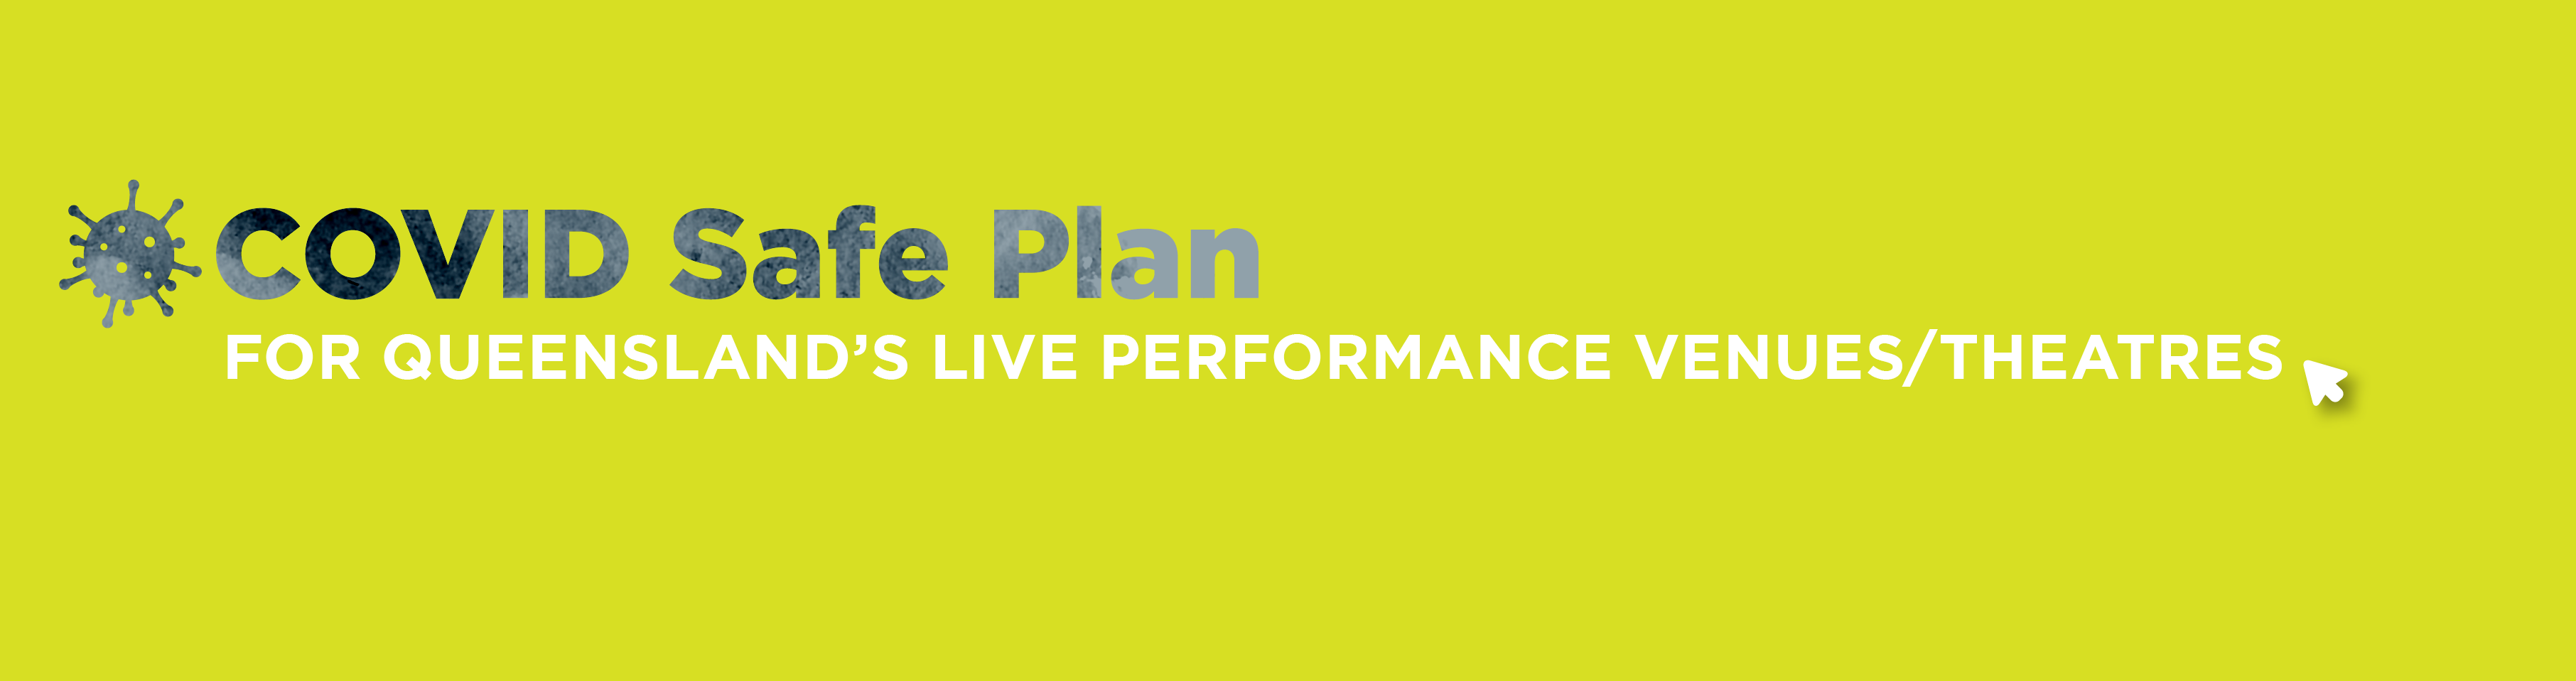 Industry COVID Safe Plan for Queensland’s Live Performance Venues/Theatres